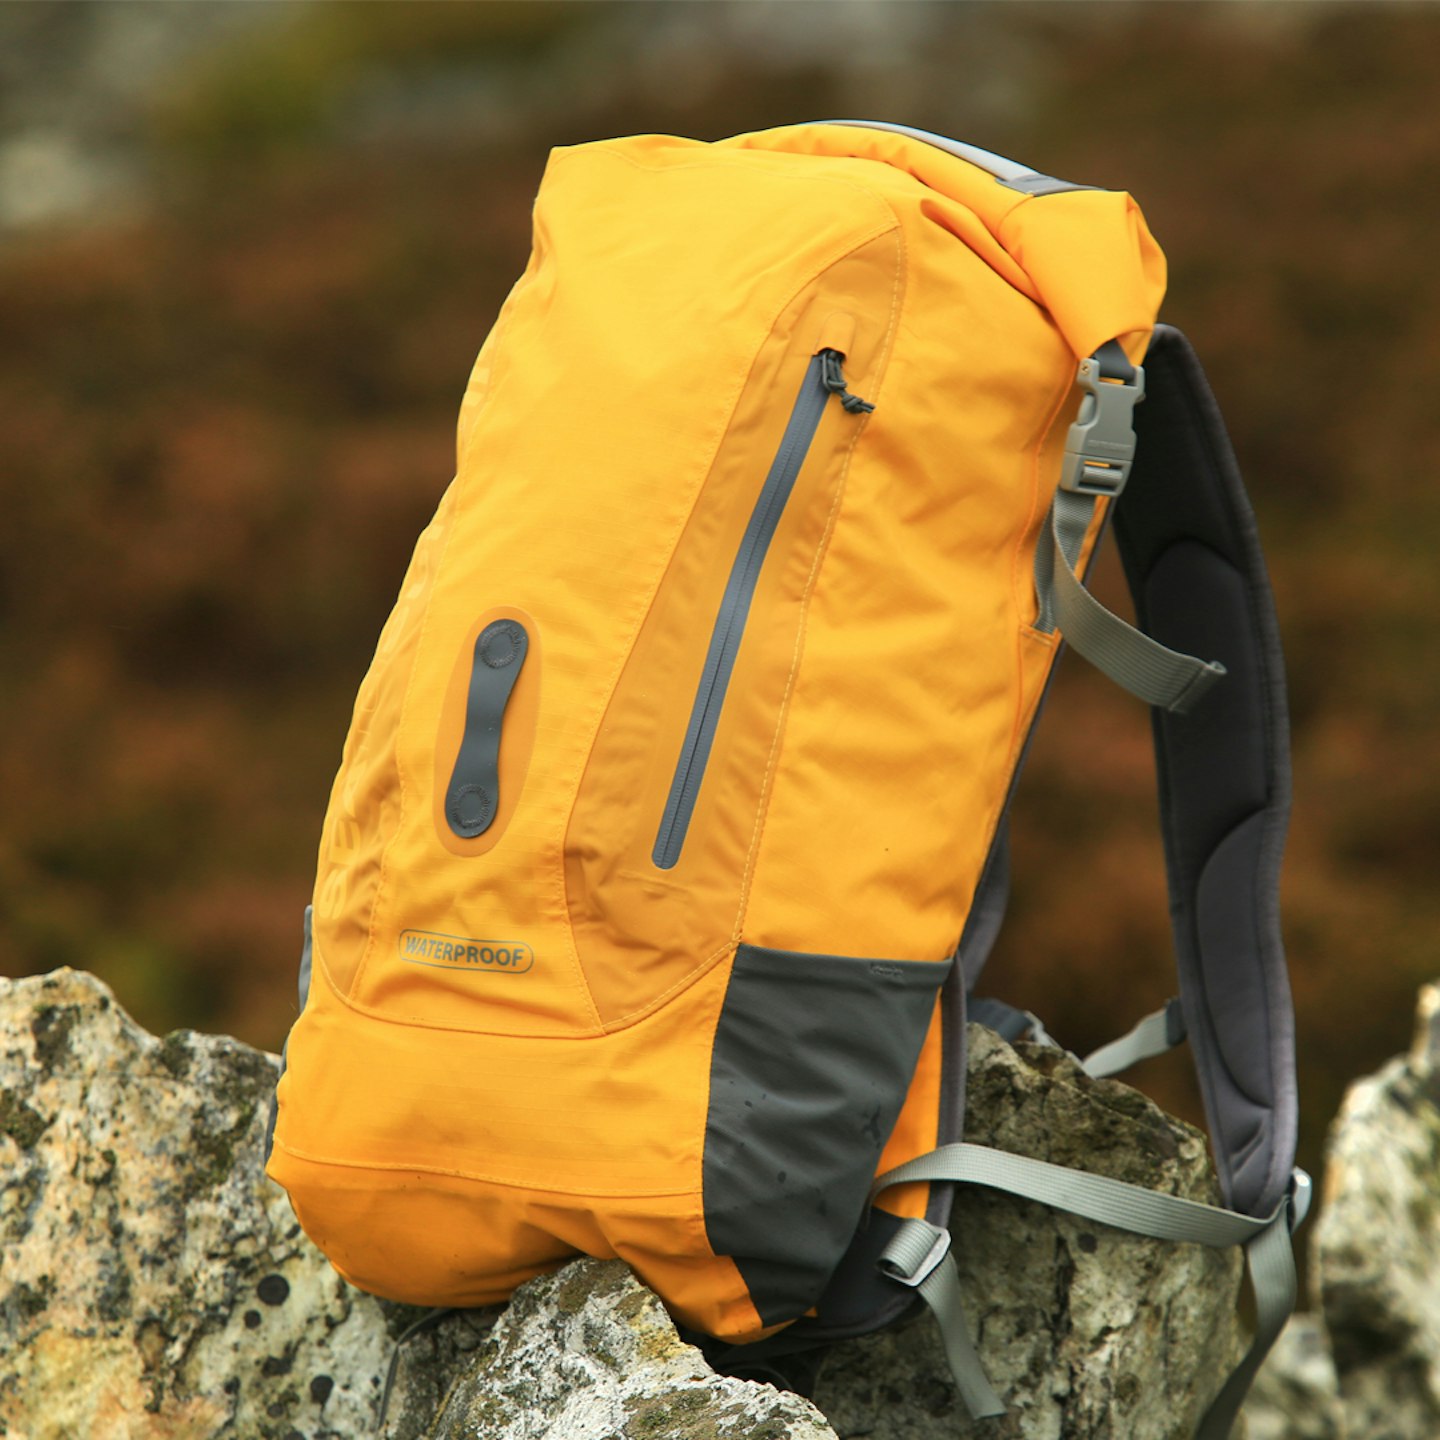 Sea to Summit Rapid 26L Dry Pack review